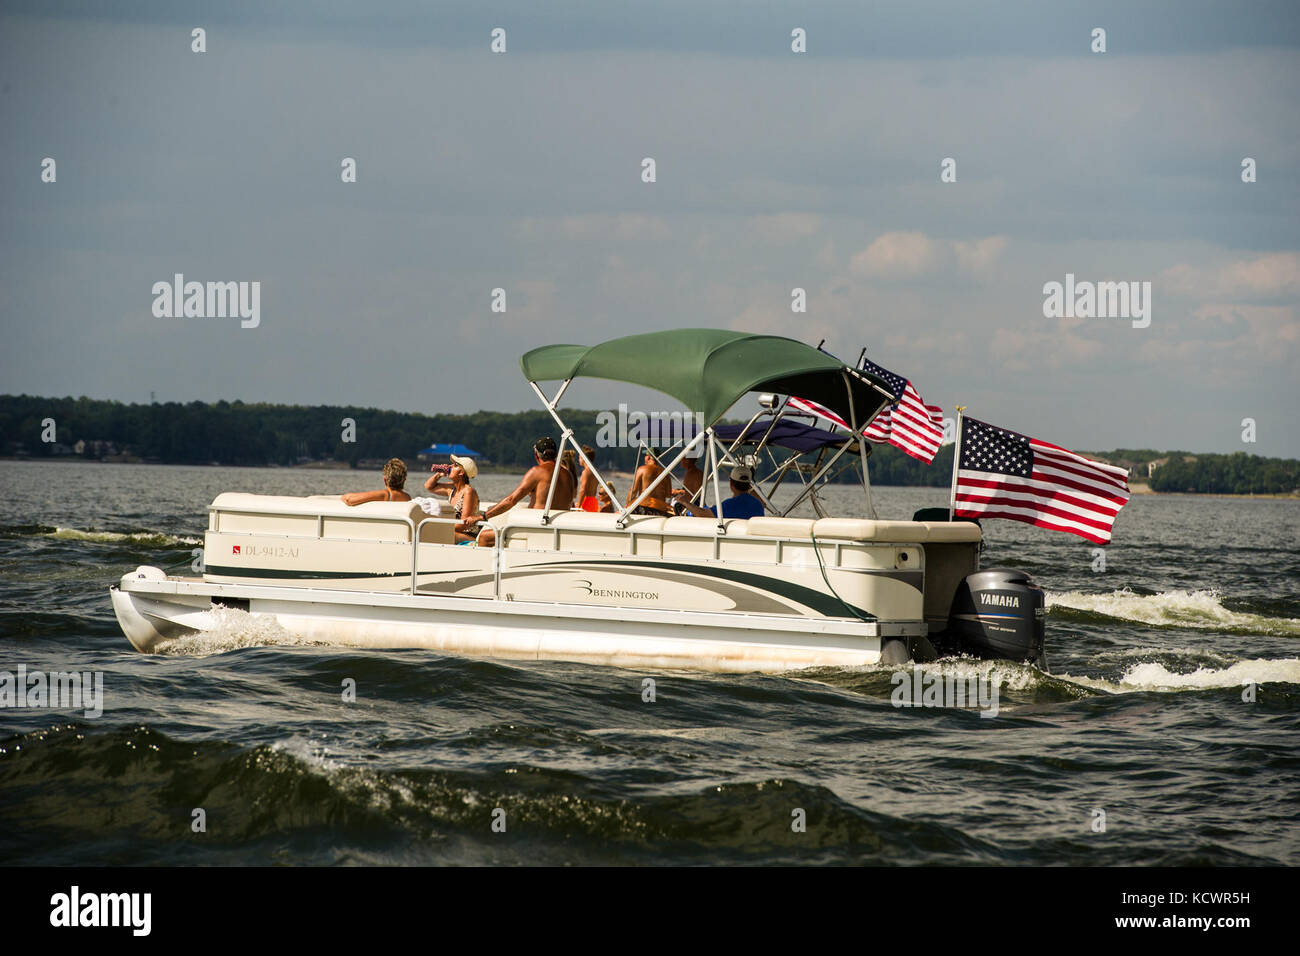 A memorial procession was held on Lake Murray, S.C., to honor U.S. Army Sgts. First Class Charles Judge, Jr., and Jonathon Prins, July 29, 2016.  The two Soldiers were killed while attempting to protect a woman who was allegedly being attacked by a gunman. The boat procession was a way to celebrate their lives.  (U.S. Air National Guard photo by Tech. Sgt. Jorge Intriago) Stock Photo